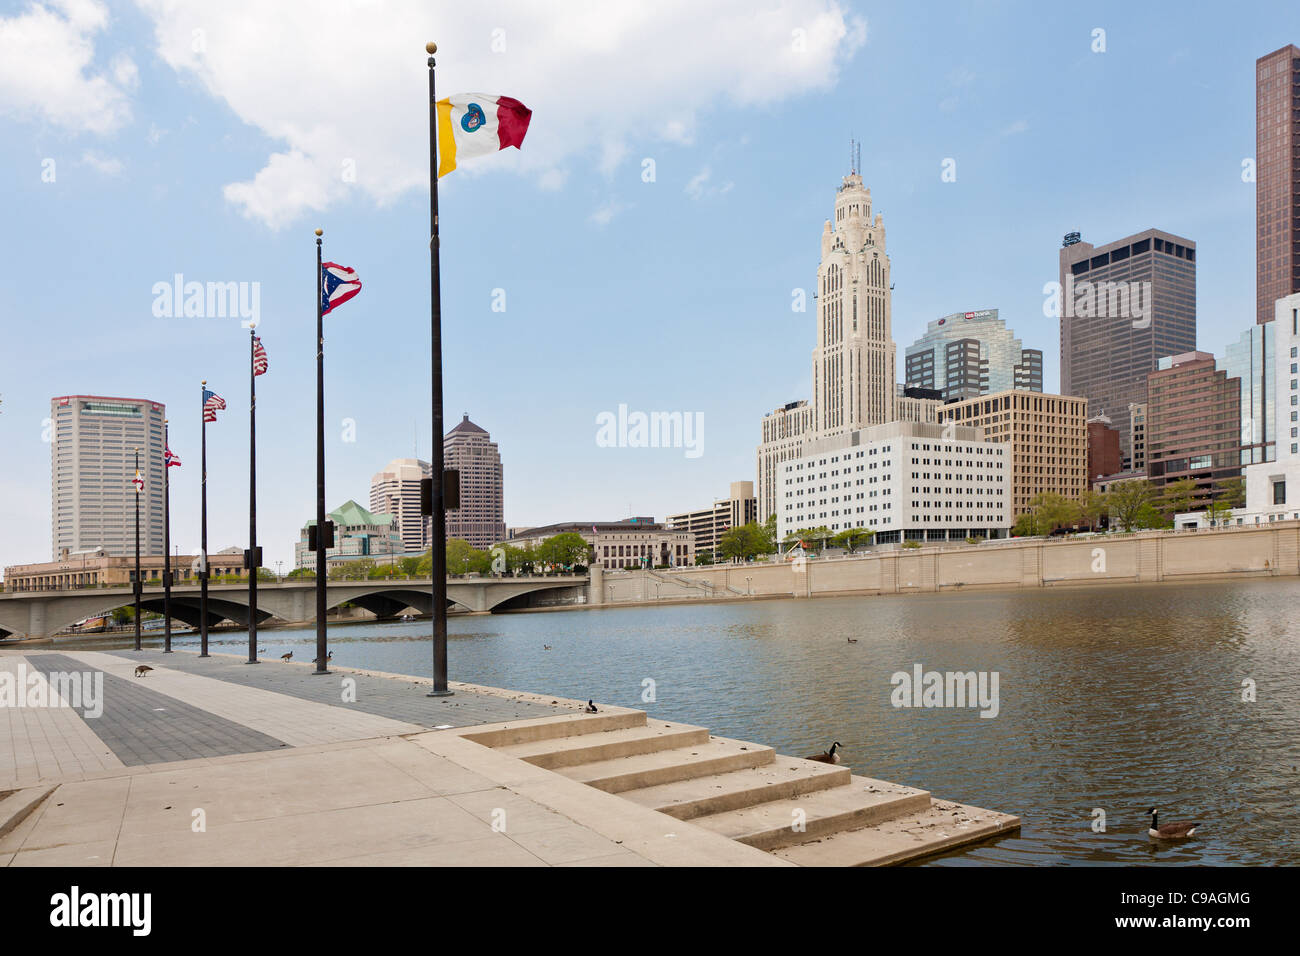 Cityscape of downtown Columbus, Ohio as seen from foot of Genoa Park across the Scioto River. Stock Photo